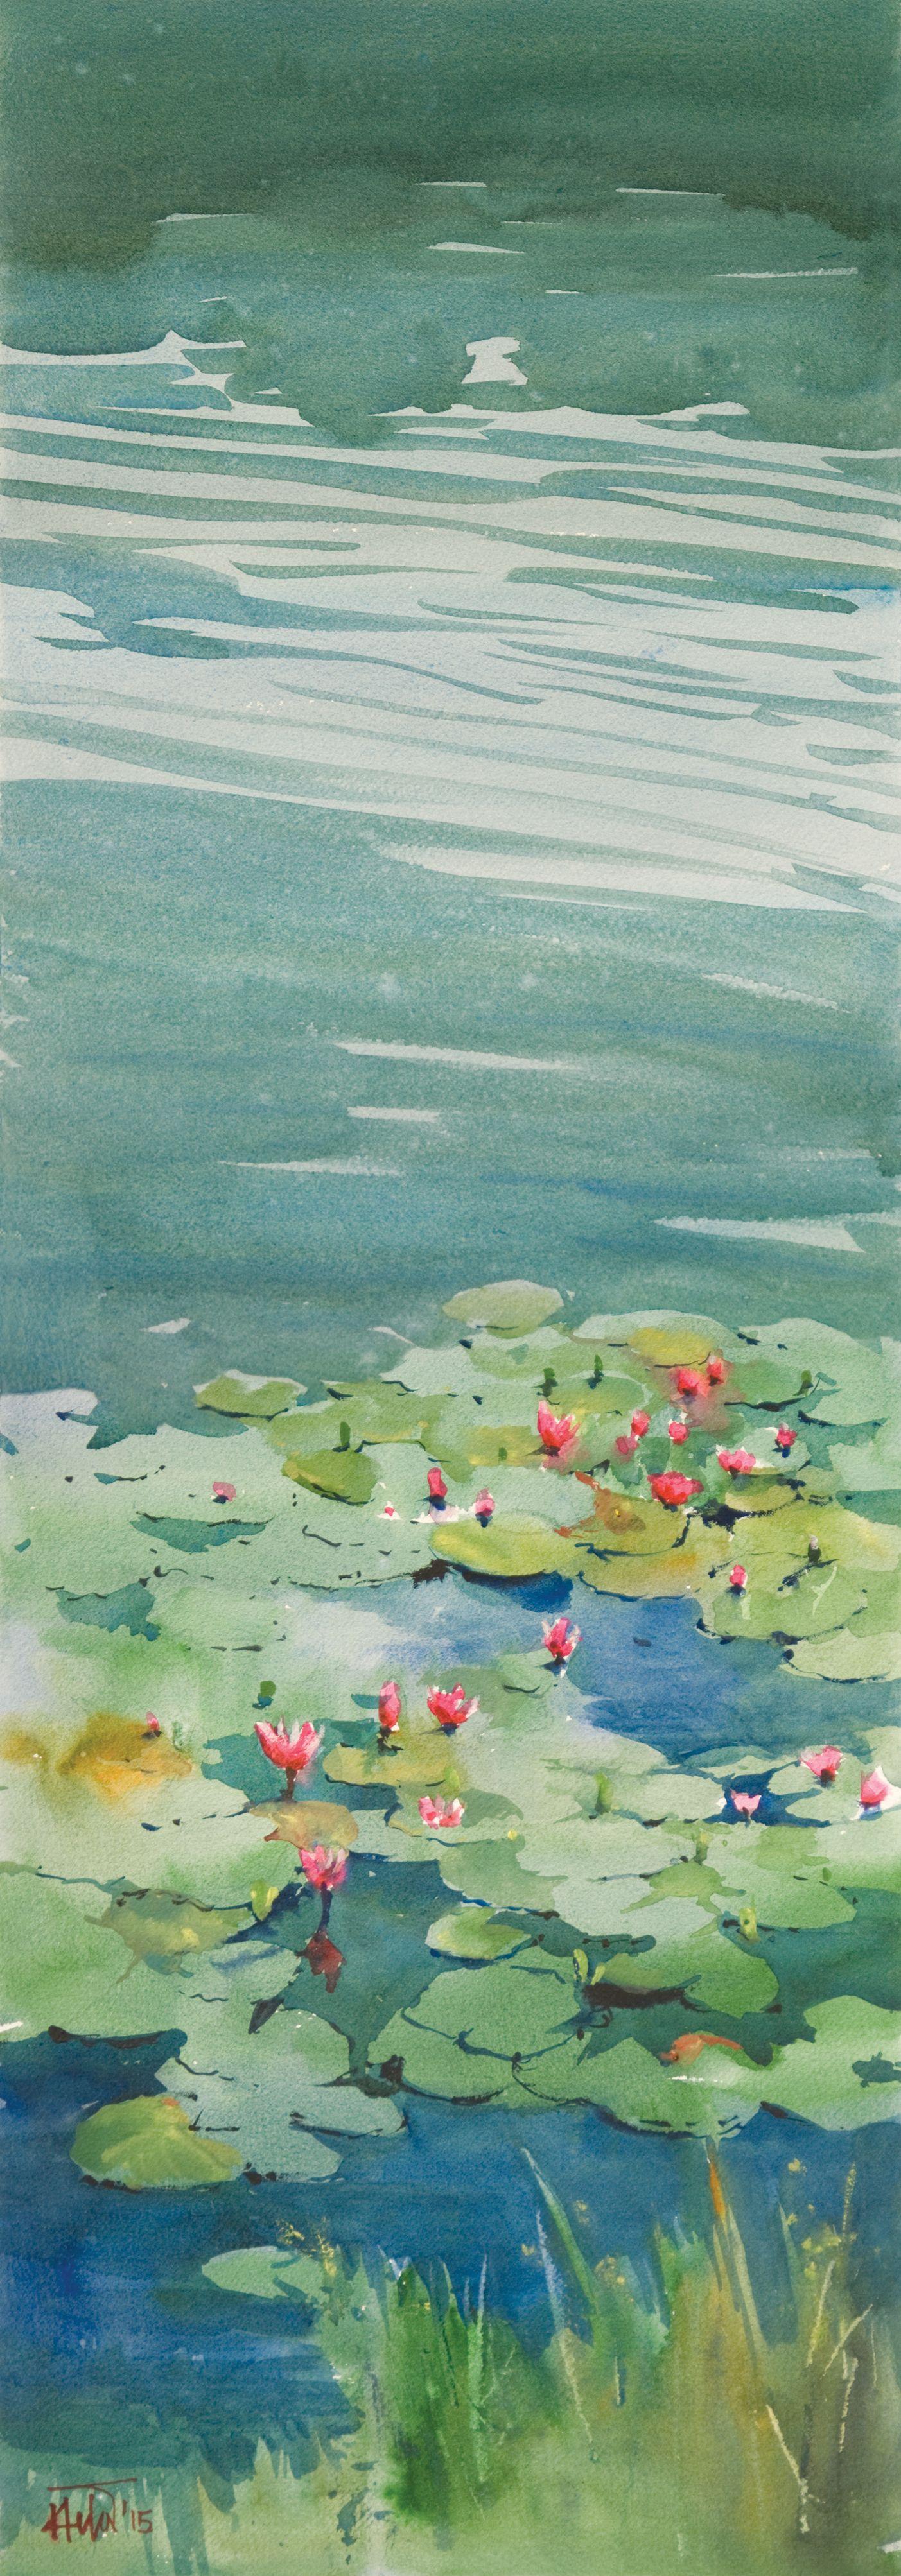 Water lily_02, Painting, Watercolor on Paper - Art by Helal Uddin